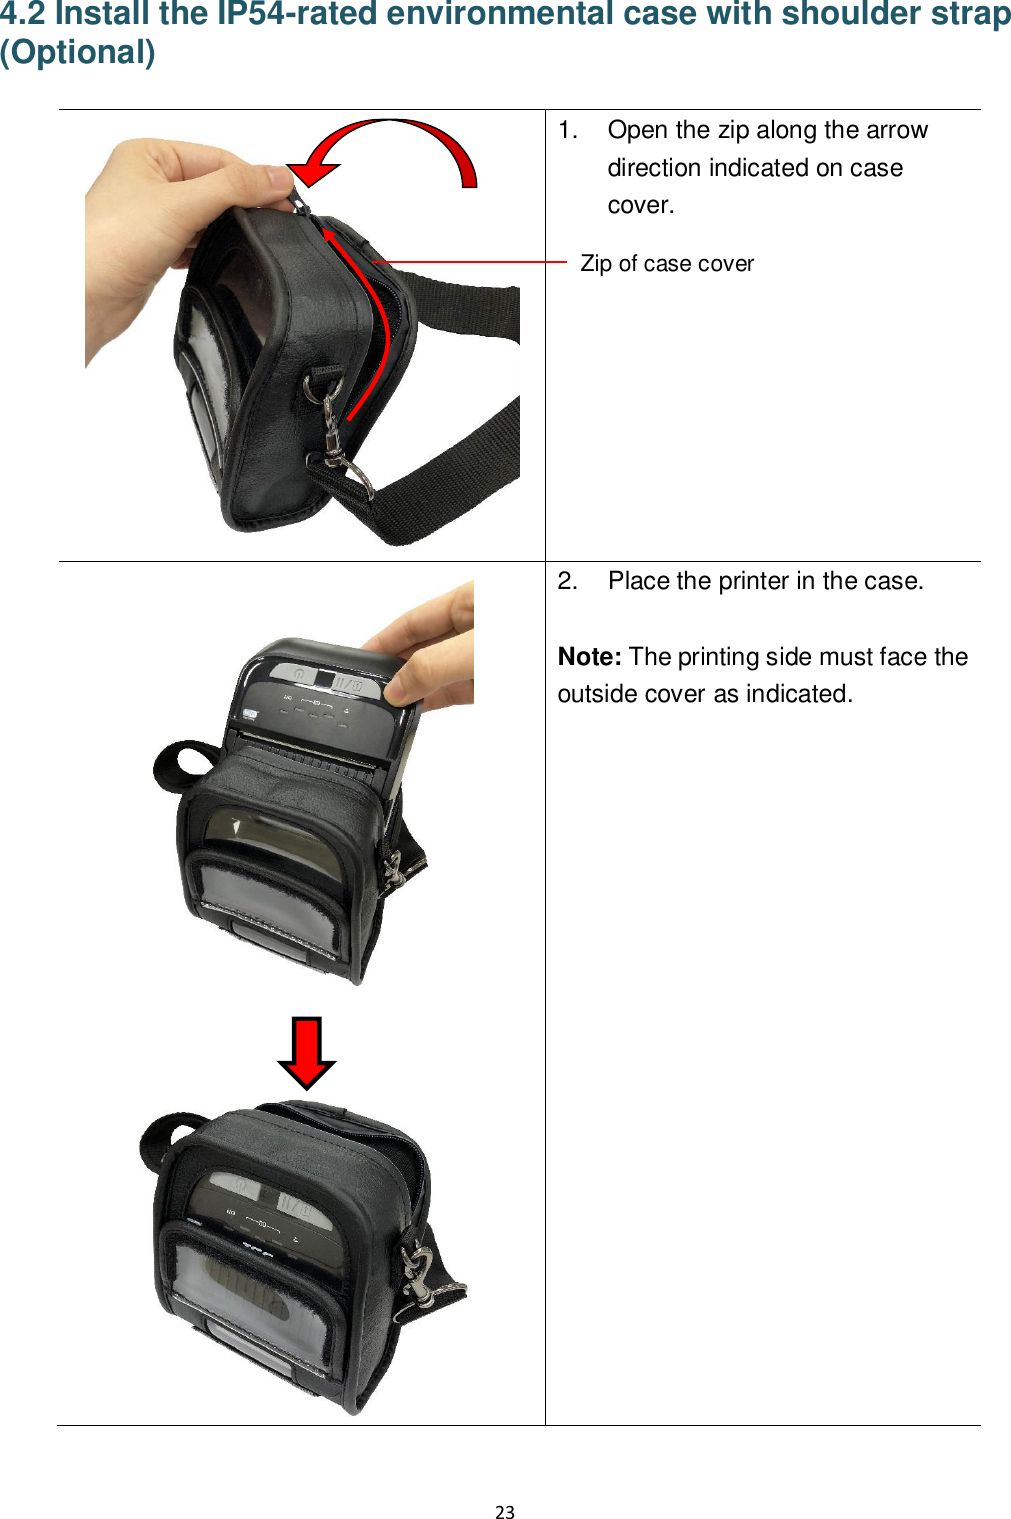 23  4.2 Install the IP54-rated environmental case with shoulder strap (Optional)     1.  Open the zip along the arrow direction indicated on case cover.     2.  Place the printer in the case.  Note: The printing side must face the outside cover as indicated. Zip of case cover 